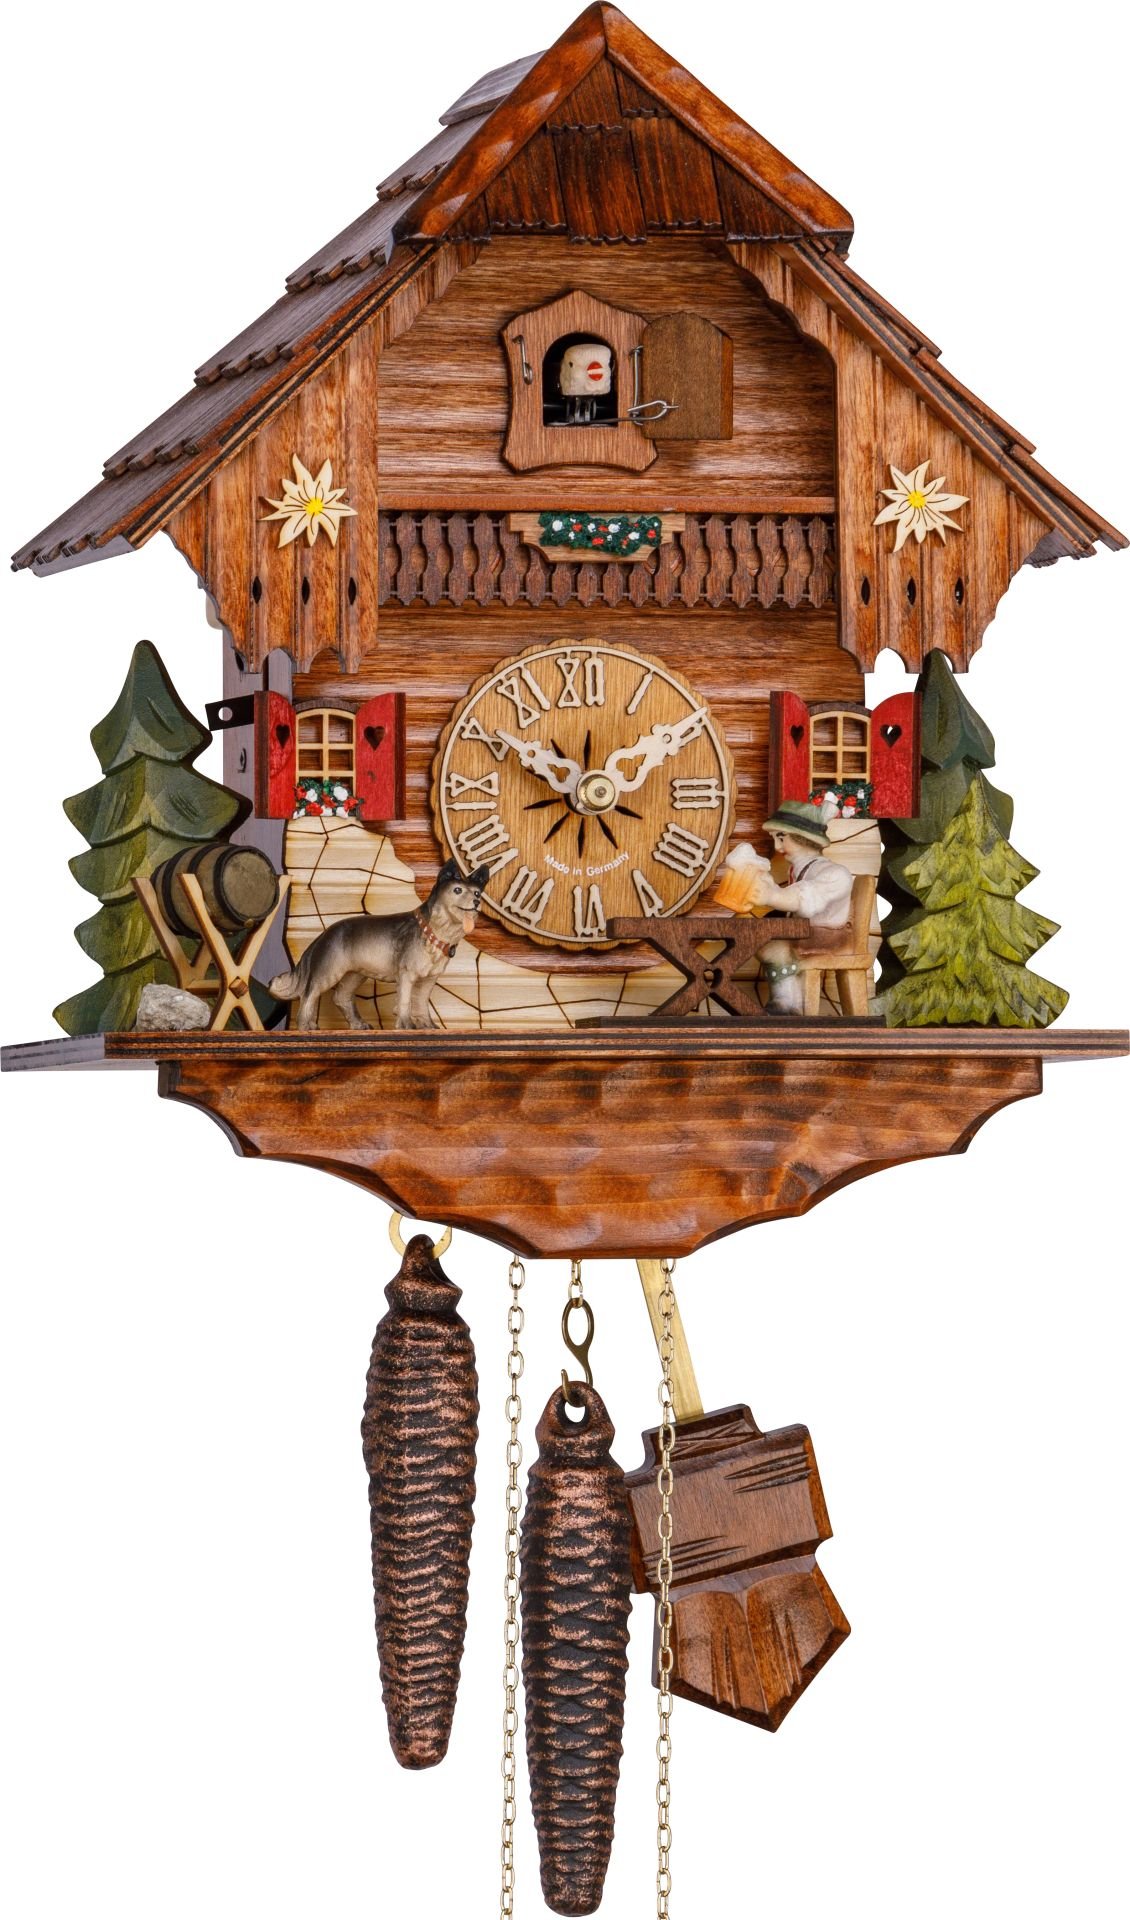 Cuckoo Clock Chalet Style 1 Day Movement 26cm by Hekas